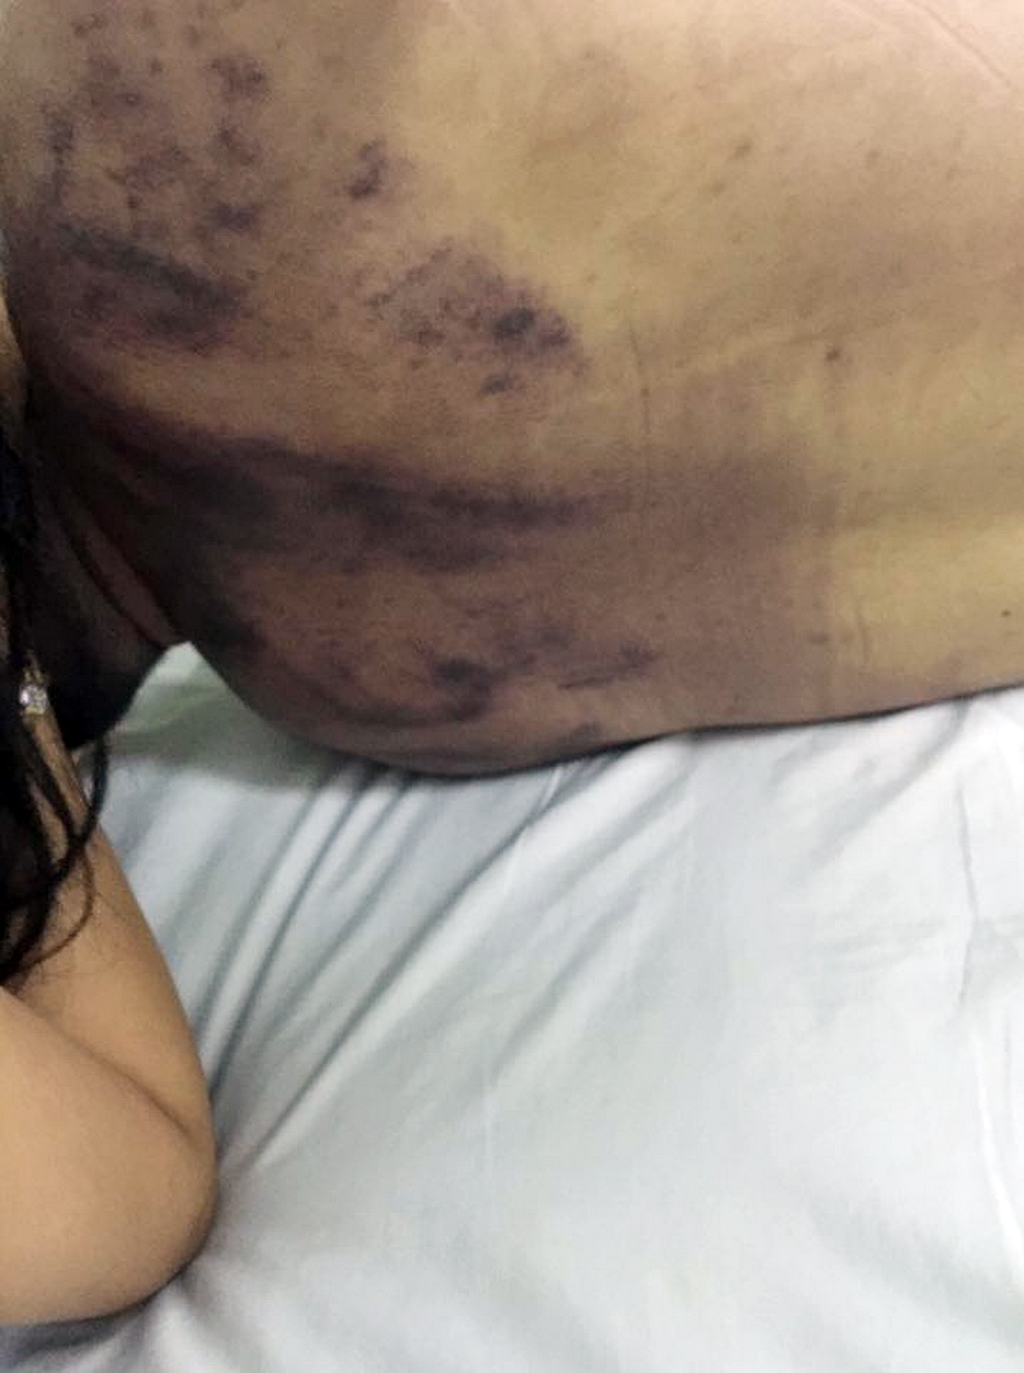 Bruises are seen on Vo Tan Minh’s body. Courtesy of Minh’s family